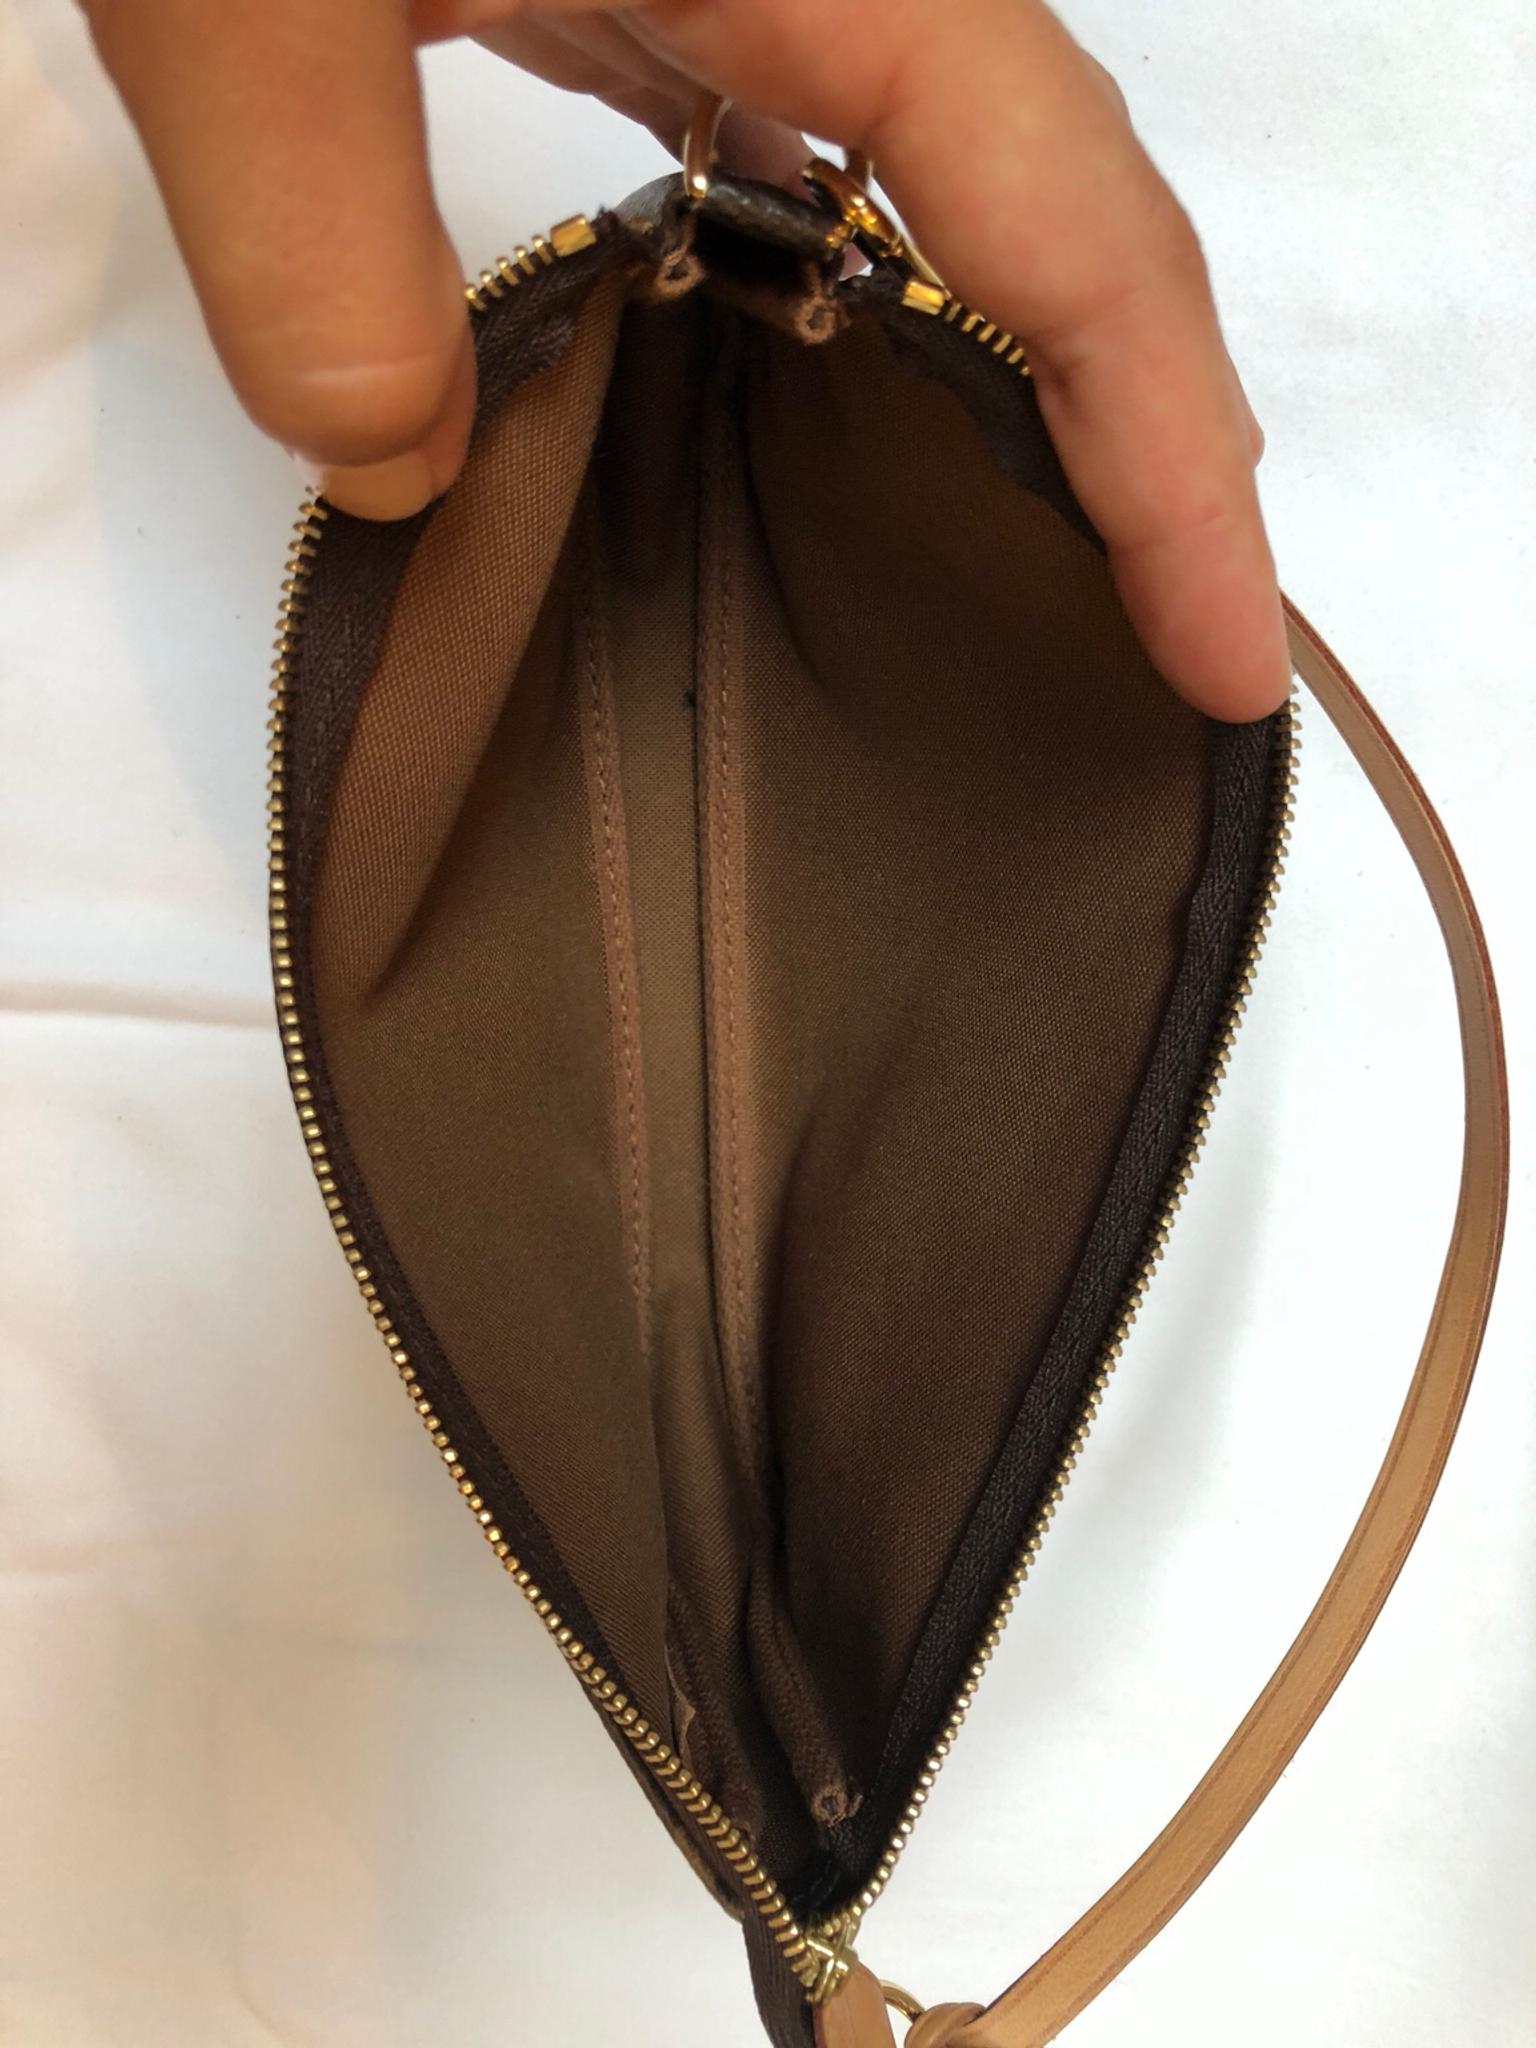 Louis Vuitton small handbag - new in W10 Chelsea for £100.00 for sale | Shpock